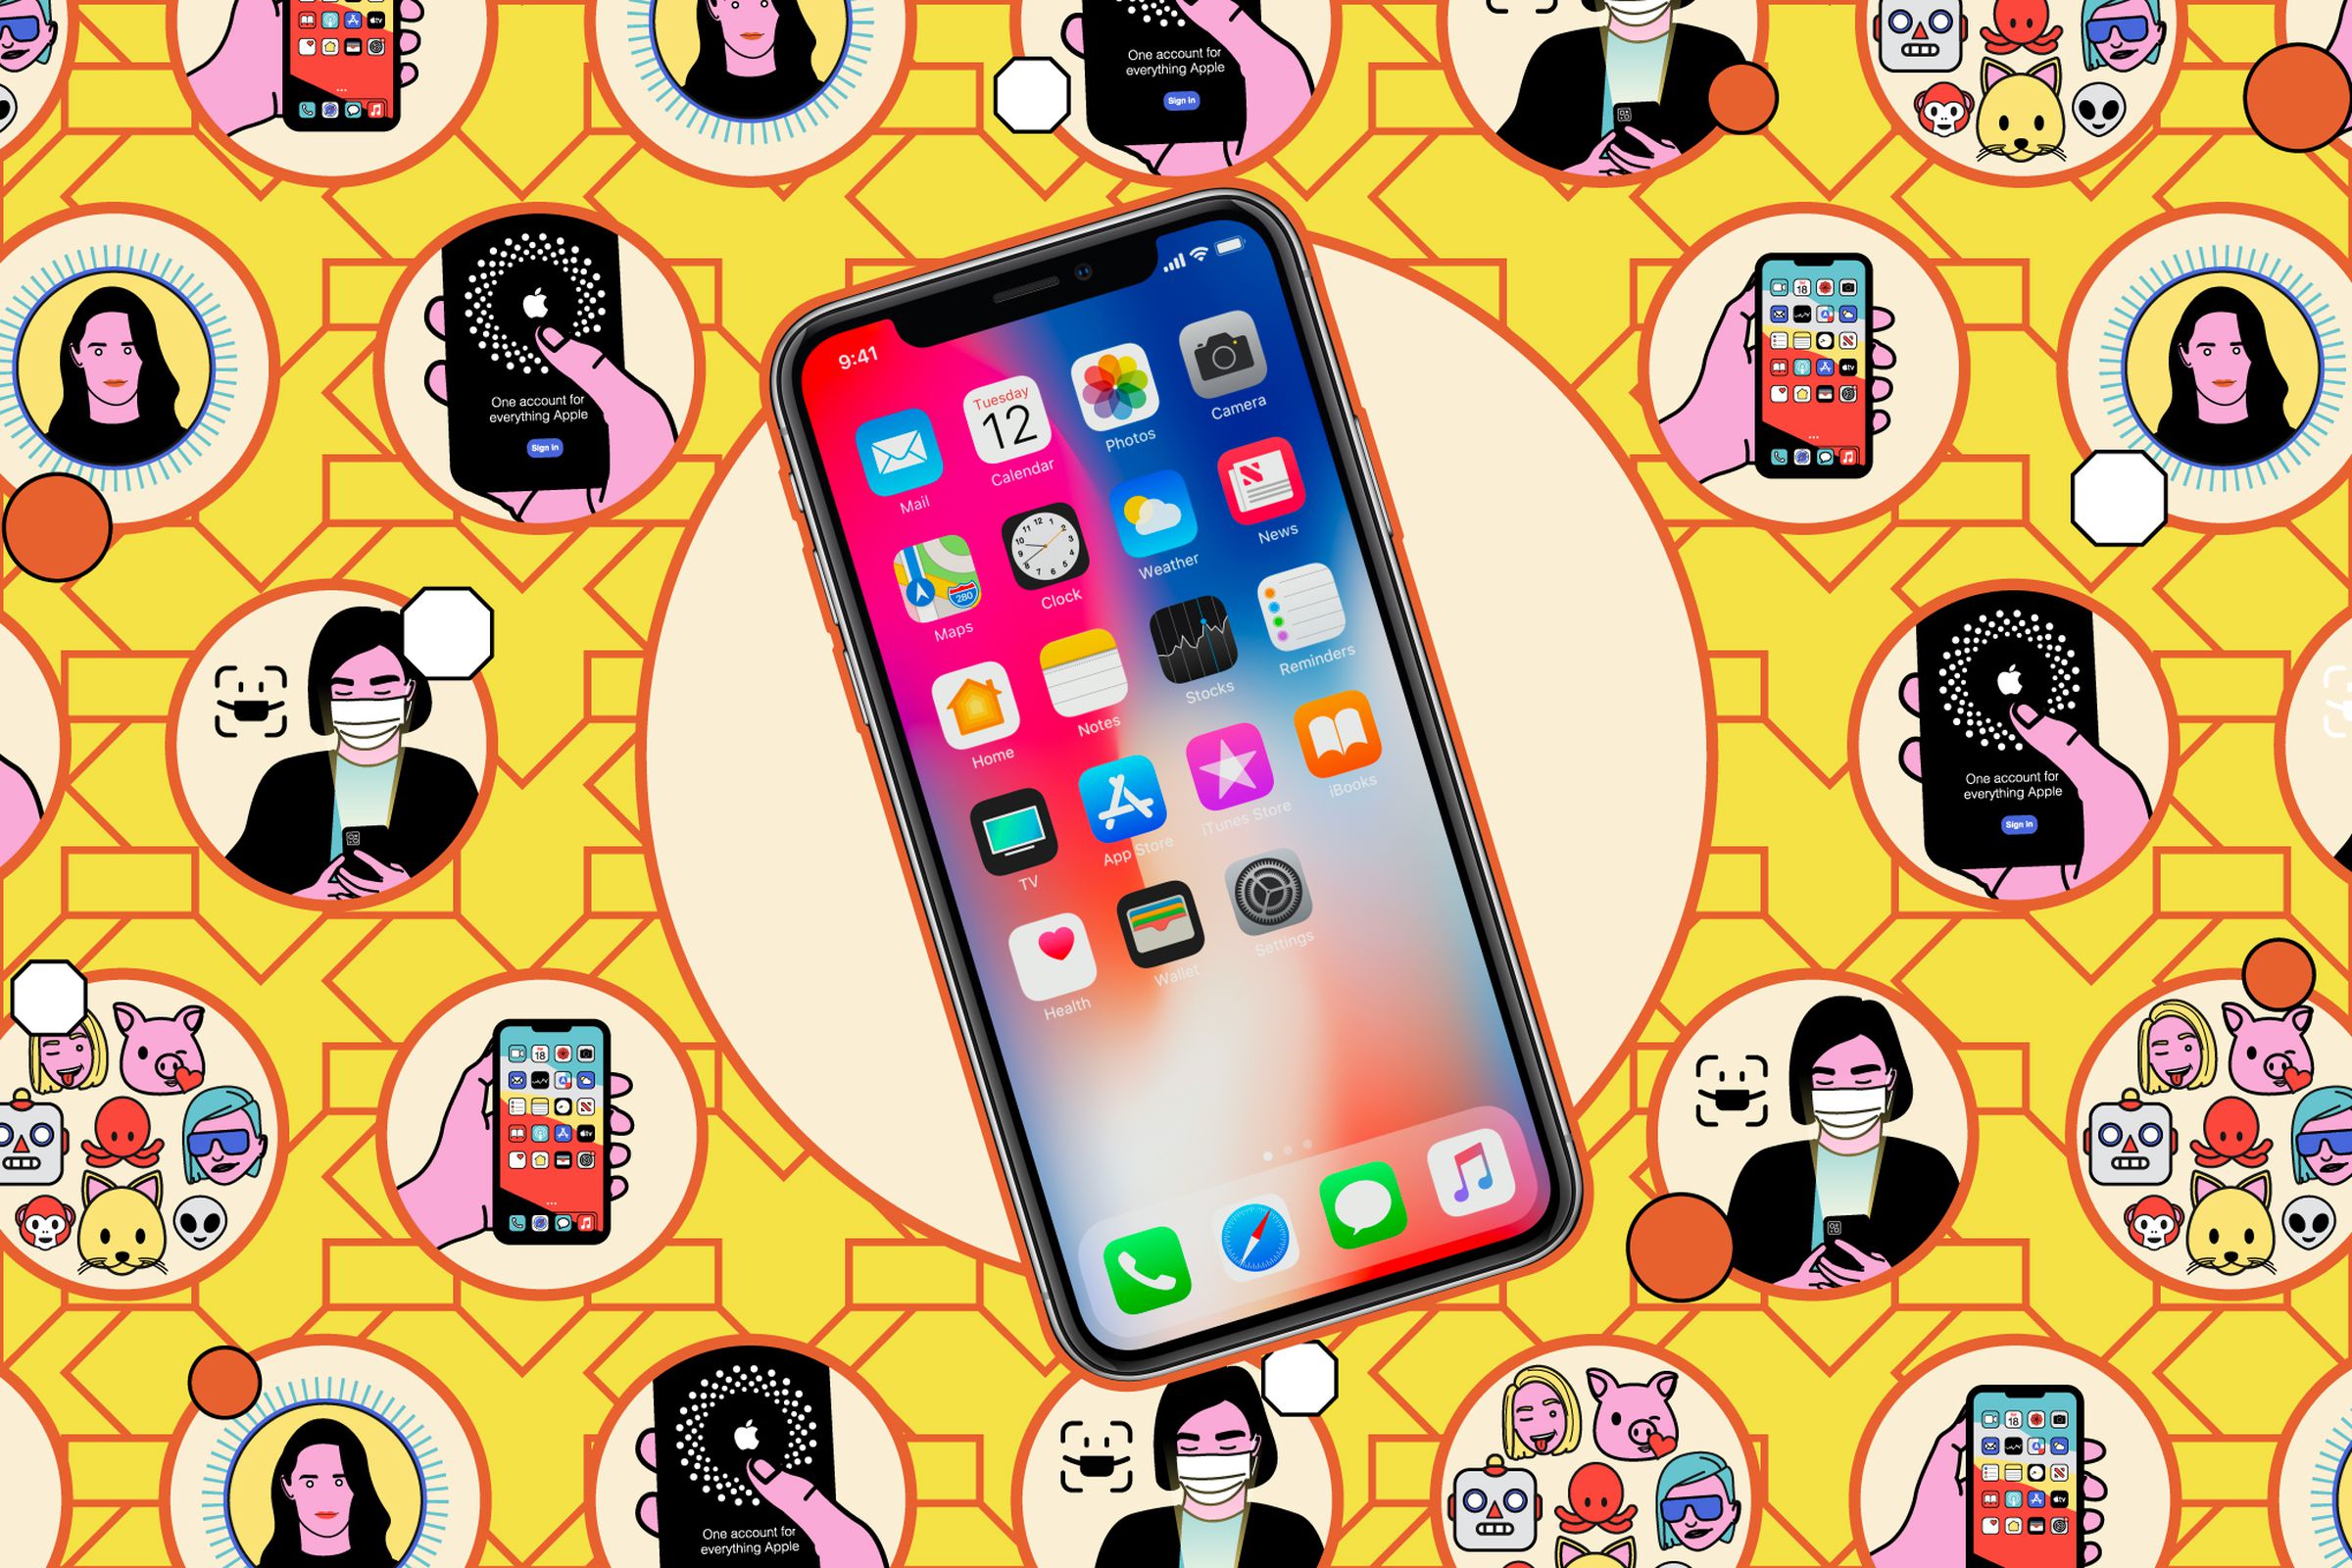 An iPhone overlaid on a yellowish circle with red border, with circles laid out in a honeycomb grid surrounding it that have small illustrations of iOS-themed images.